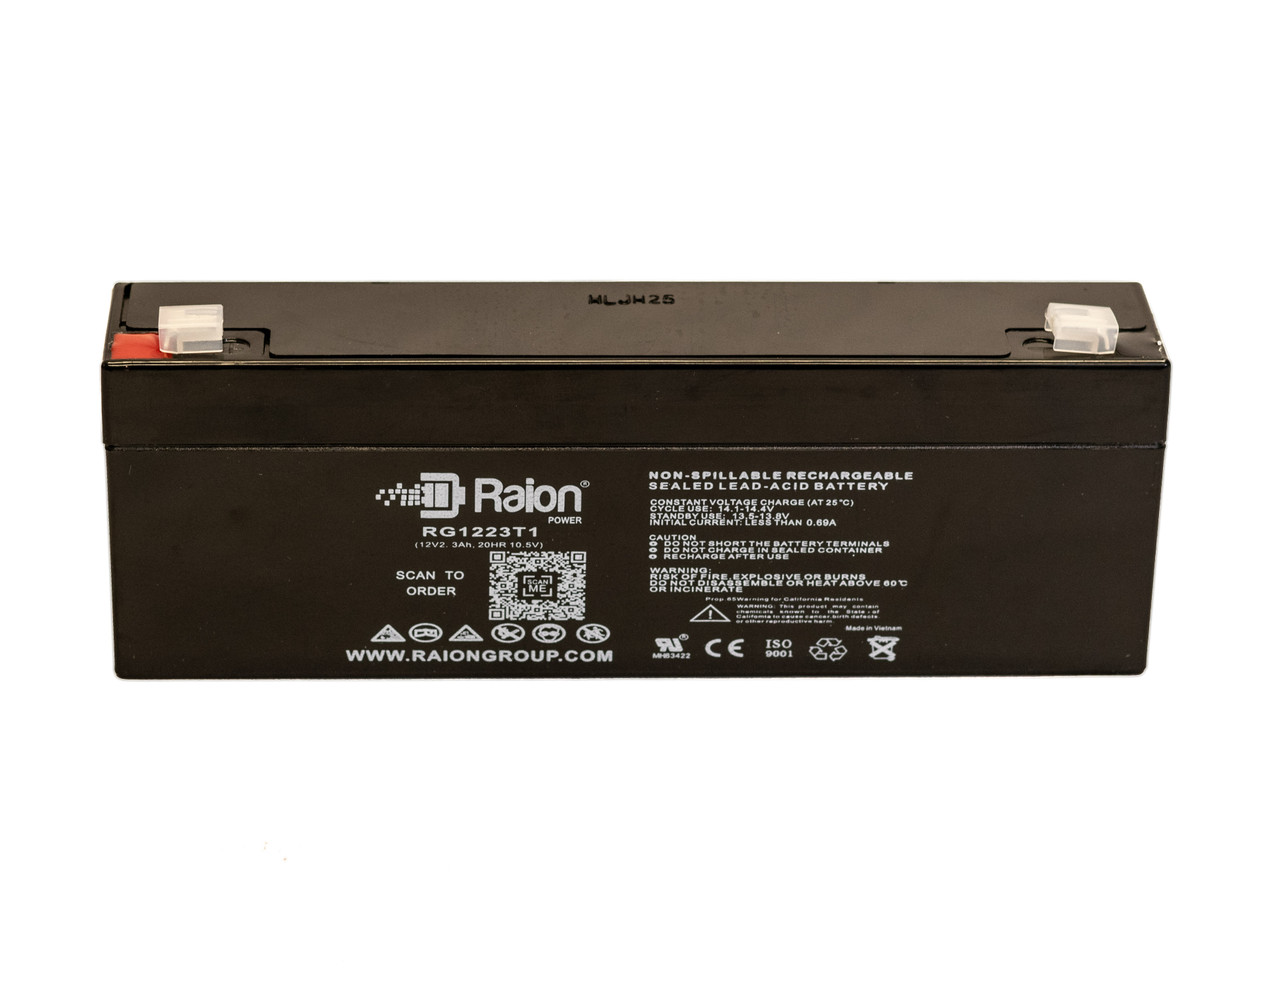 Raion Power 12V 2.3Ah SLA Battery With T1 Terminals For Ivac Medical Systems 500 KEOFEED